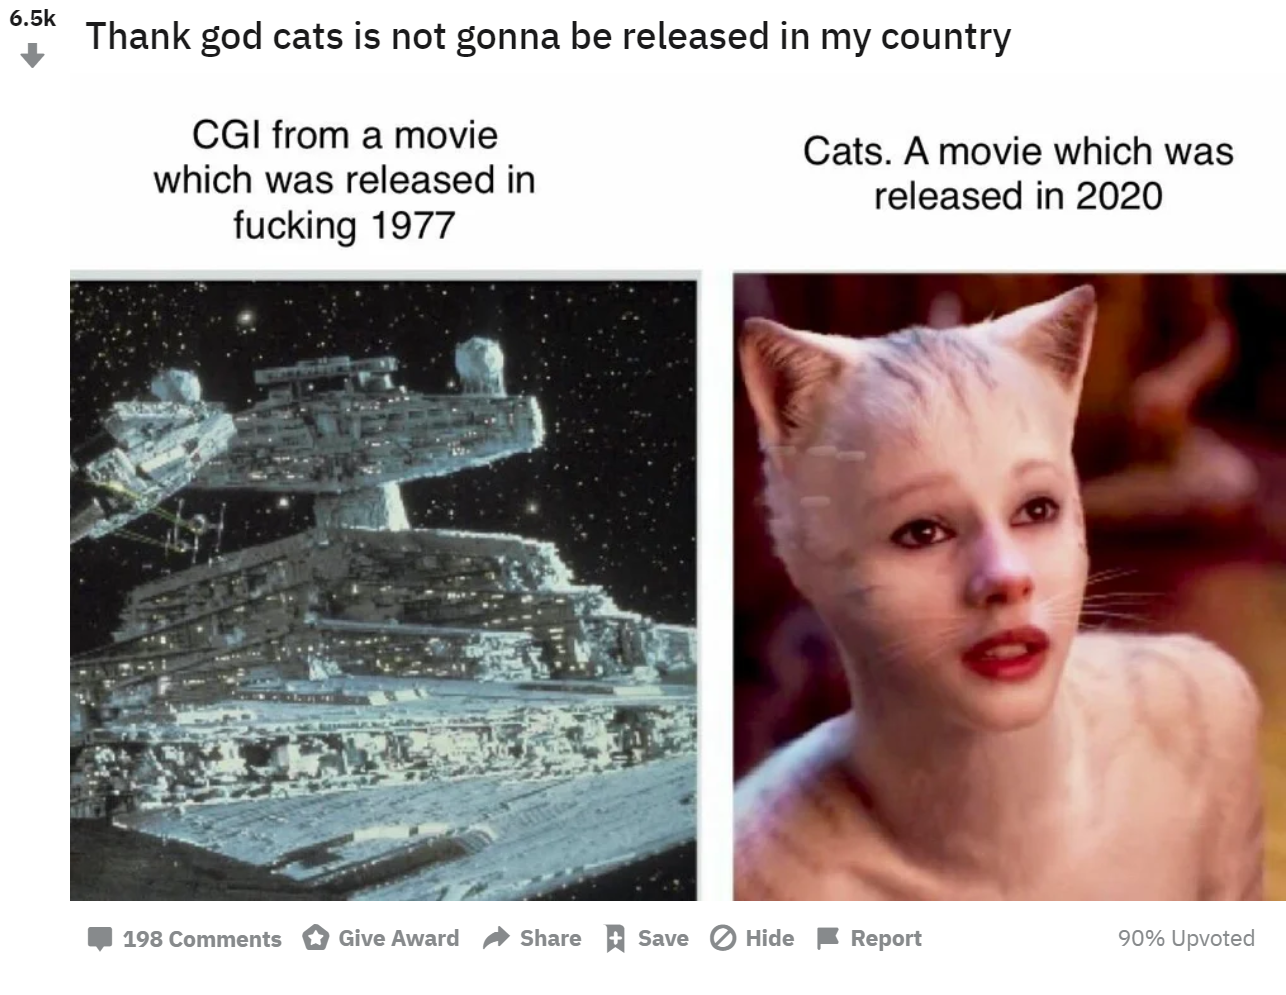 star destroyer empire strikes back - Thank god cats is not gonna be released in my country Cgi from a movie which was released in fucking 1977 Cats. A movie which was released in 2020 198 Give Award Save Hide Report 90% Upvoted